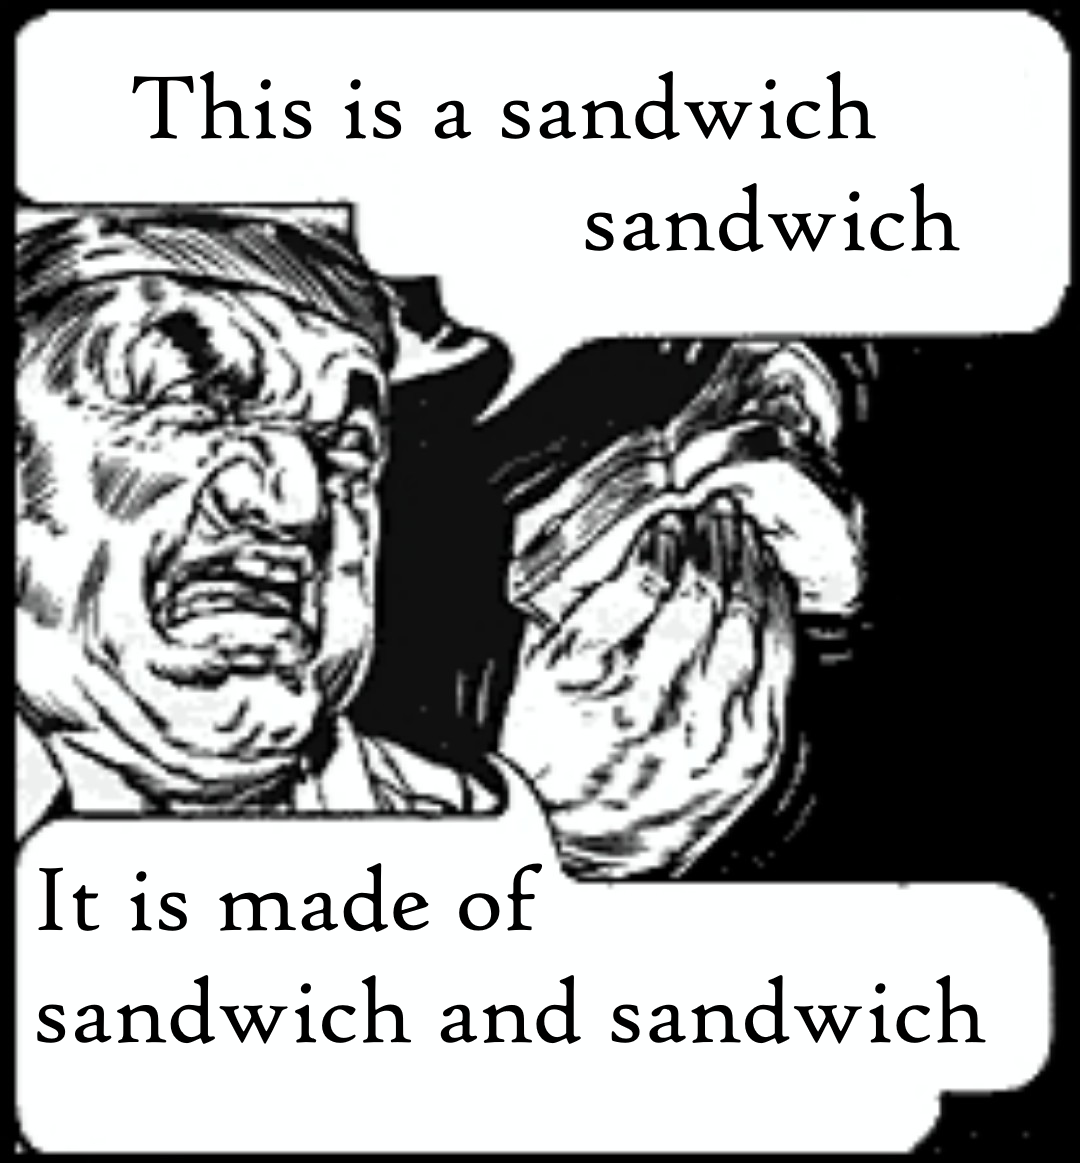 And also sandwich (March Meme Revival)